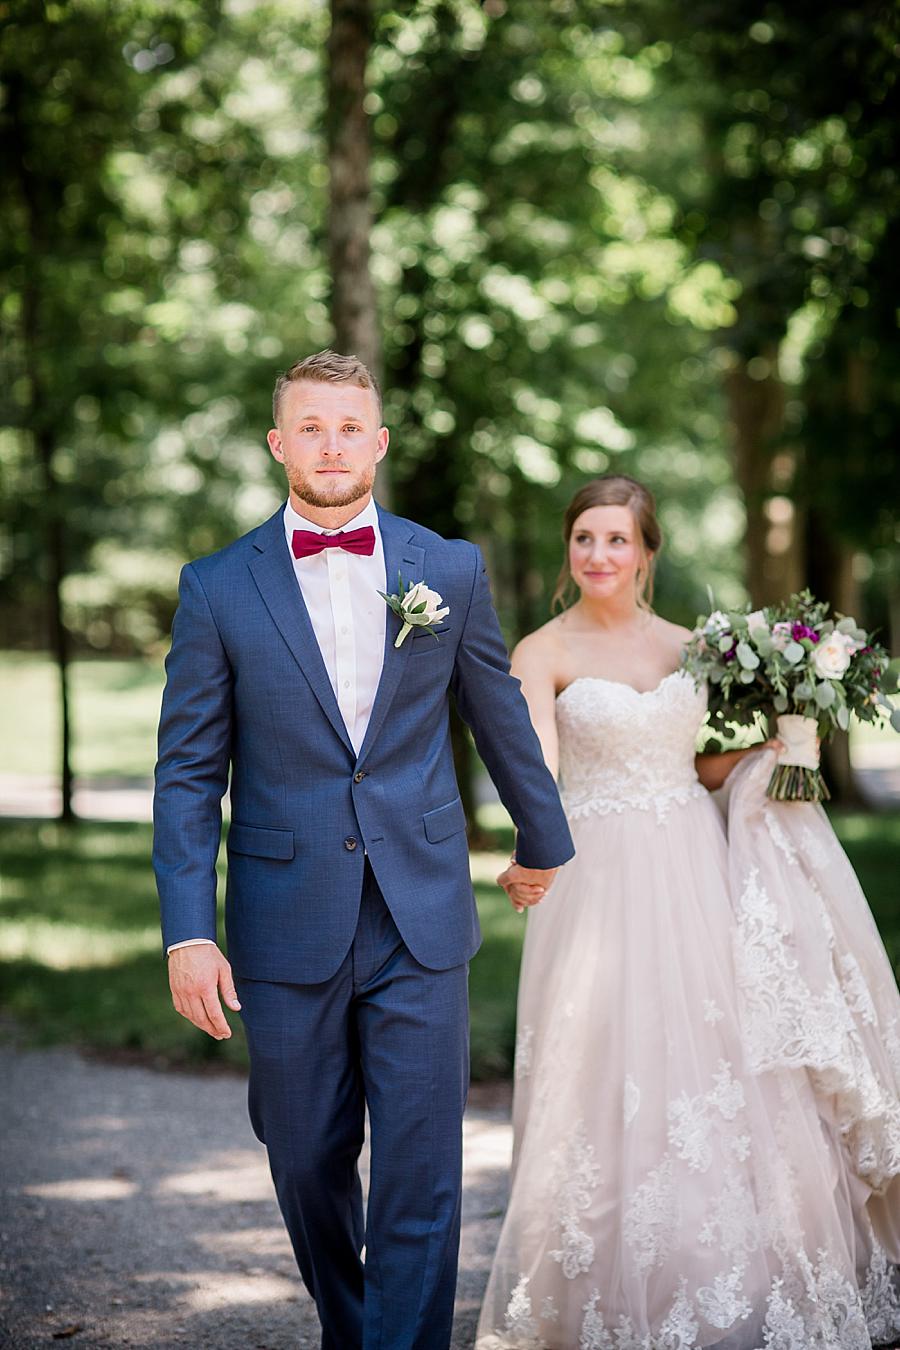 Groom leading his bride at this RiverView Family Farm Wedding by Knoxville Wedding Photographer, Amanda May Photos.